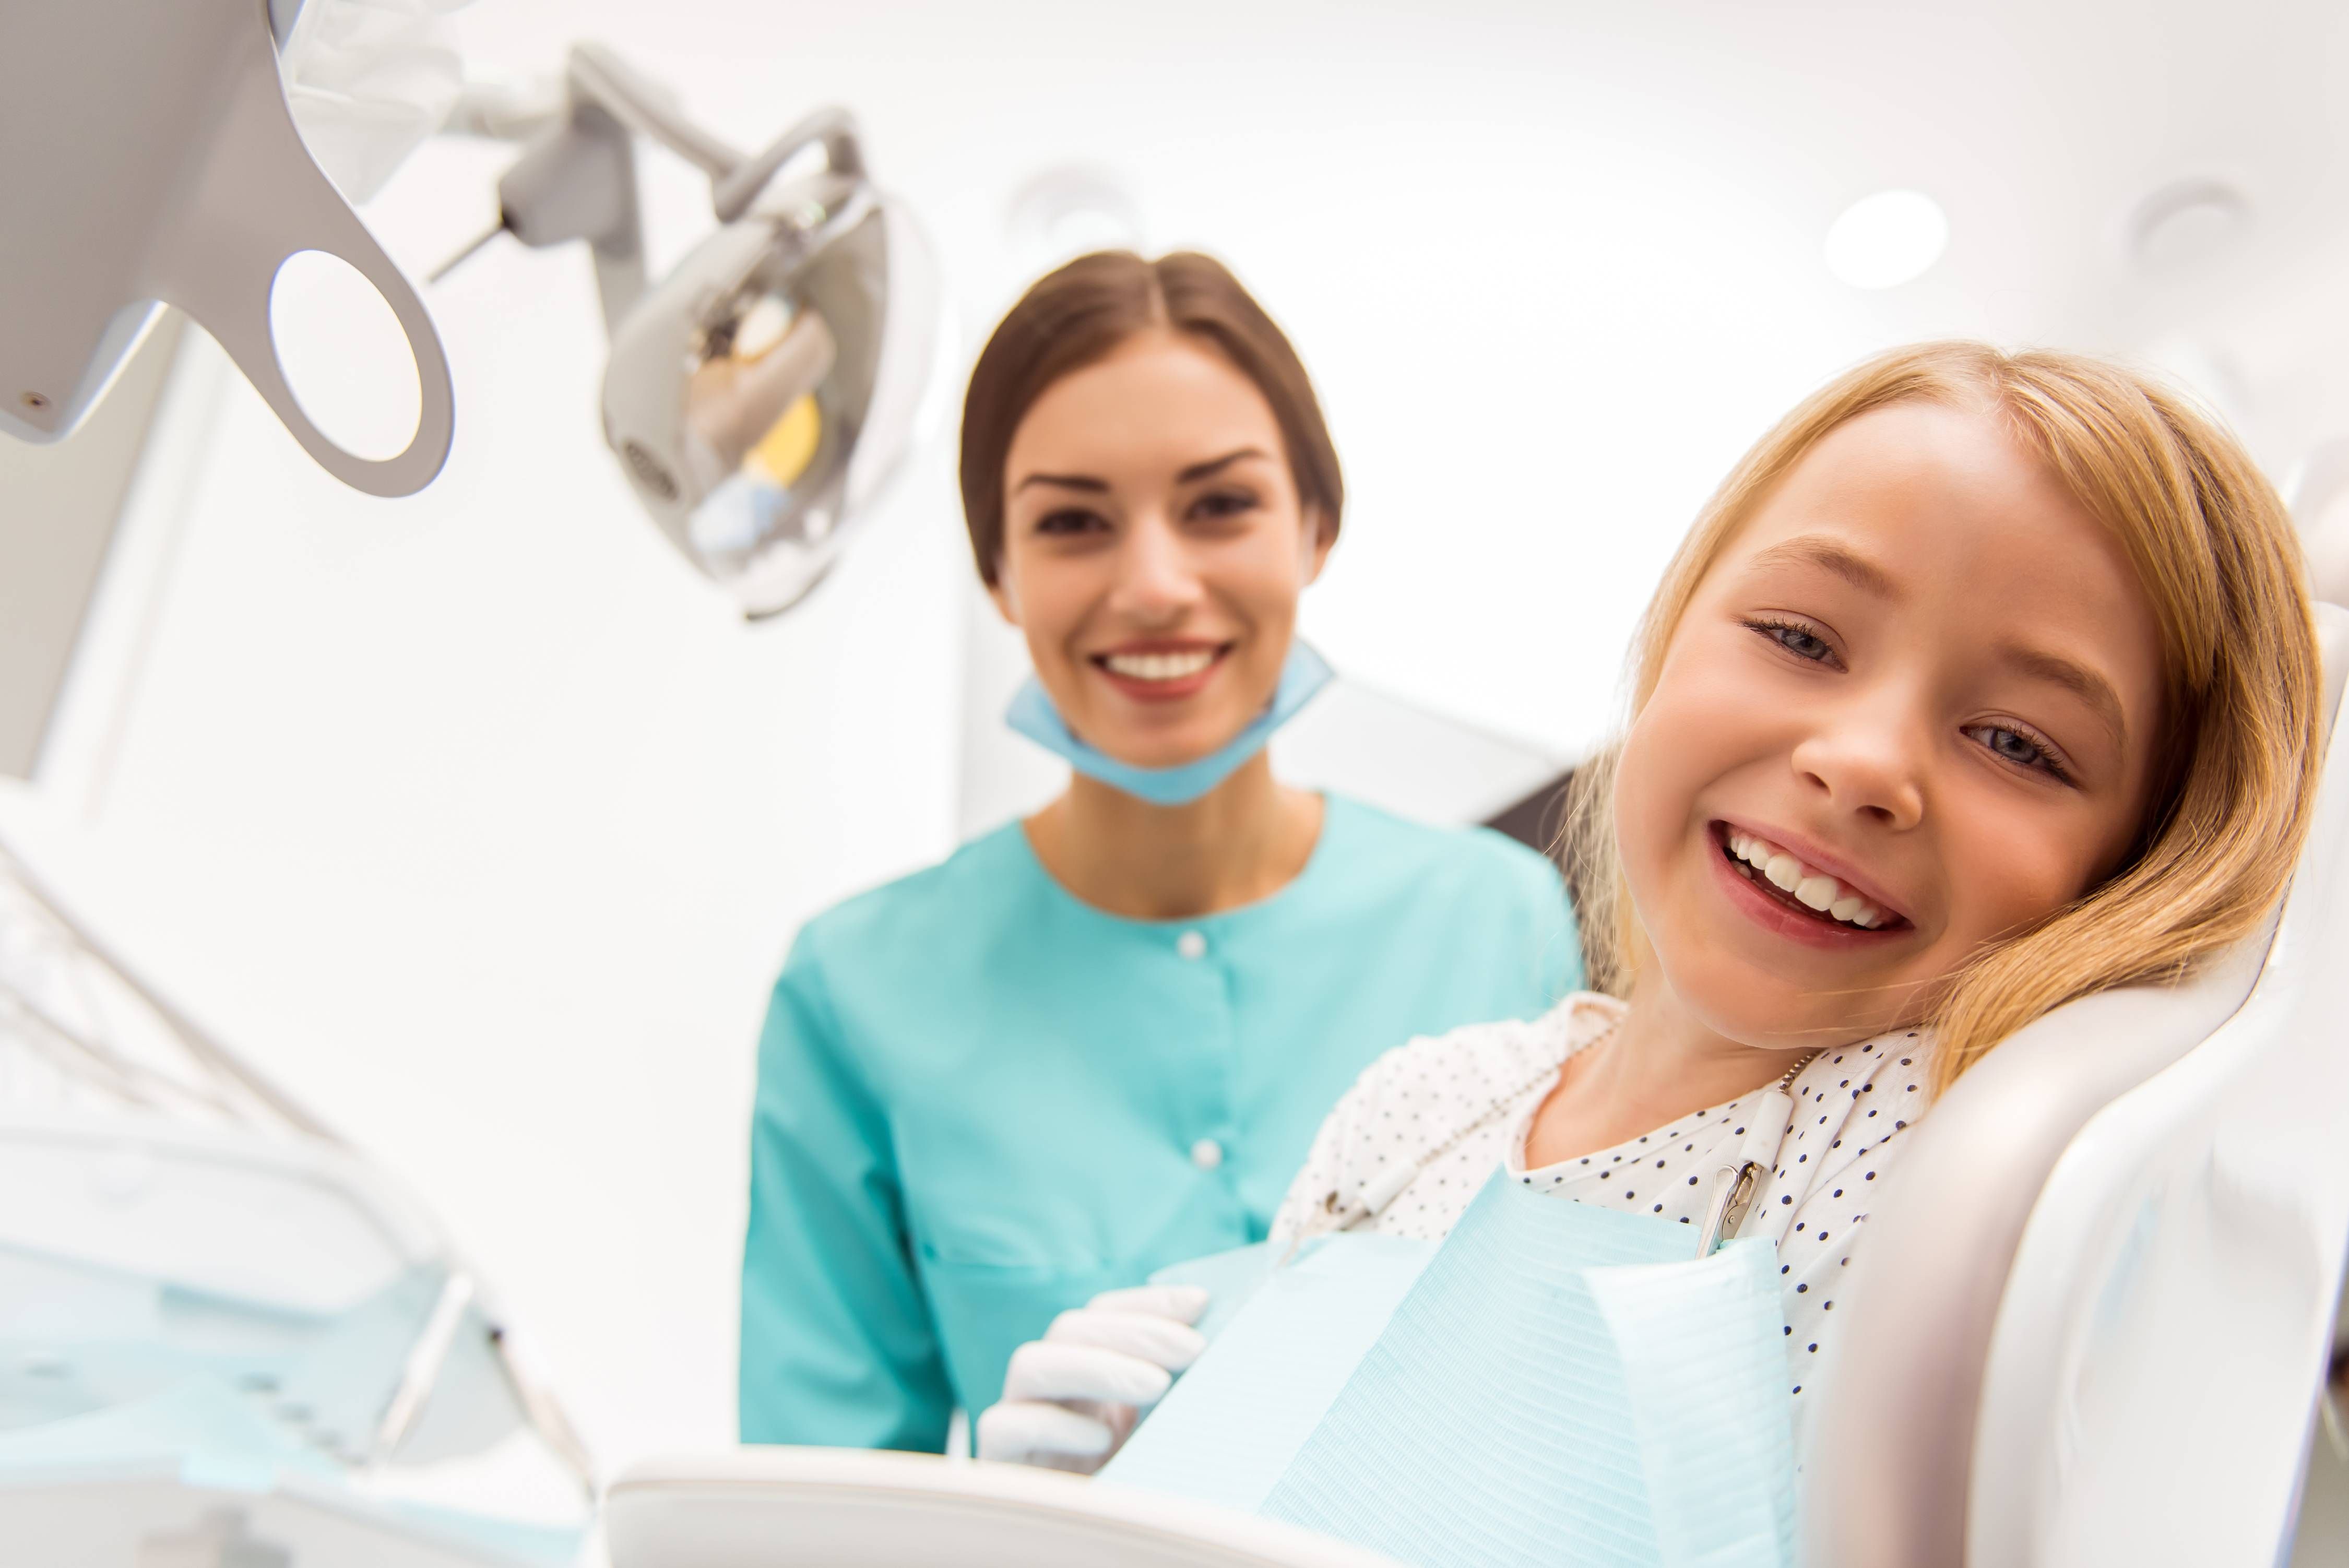 How Do I Prepare My Child for a Cavity Filling?